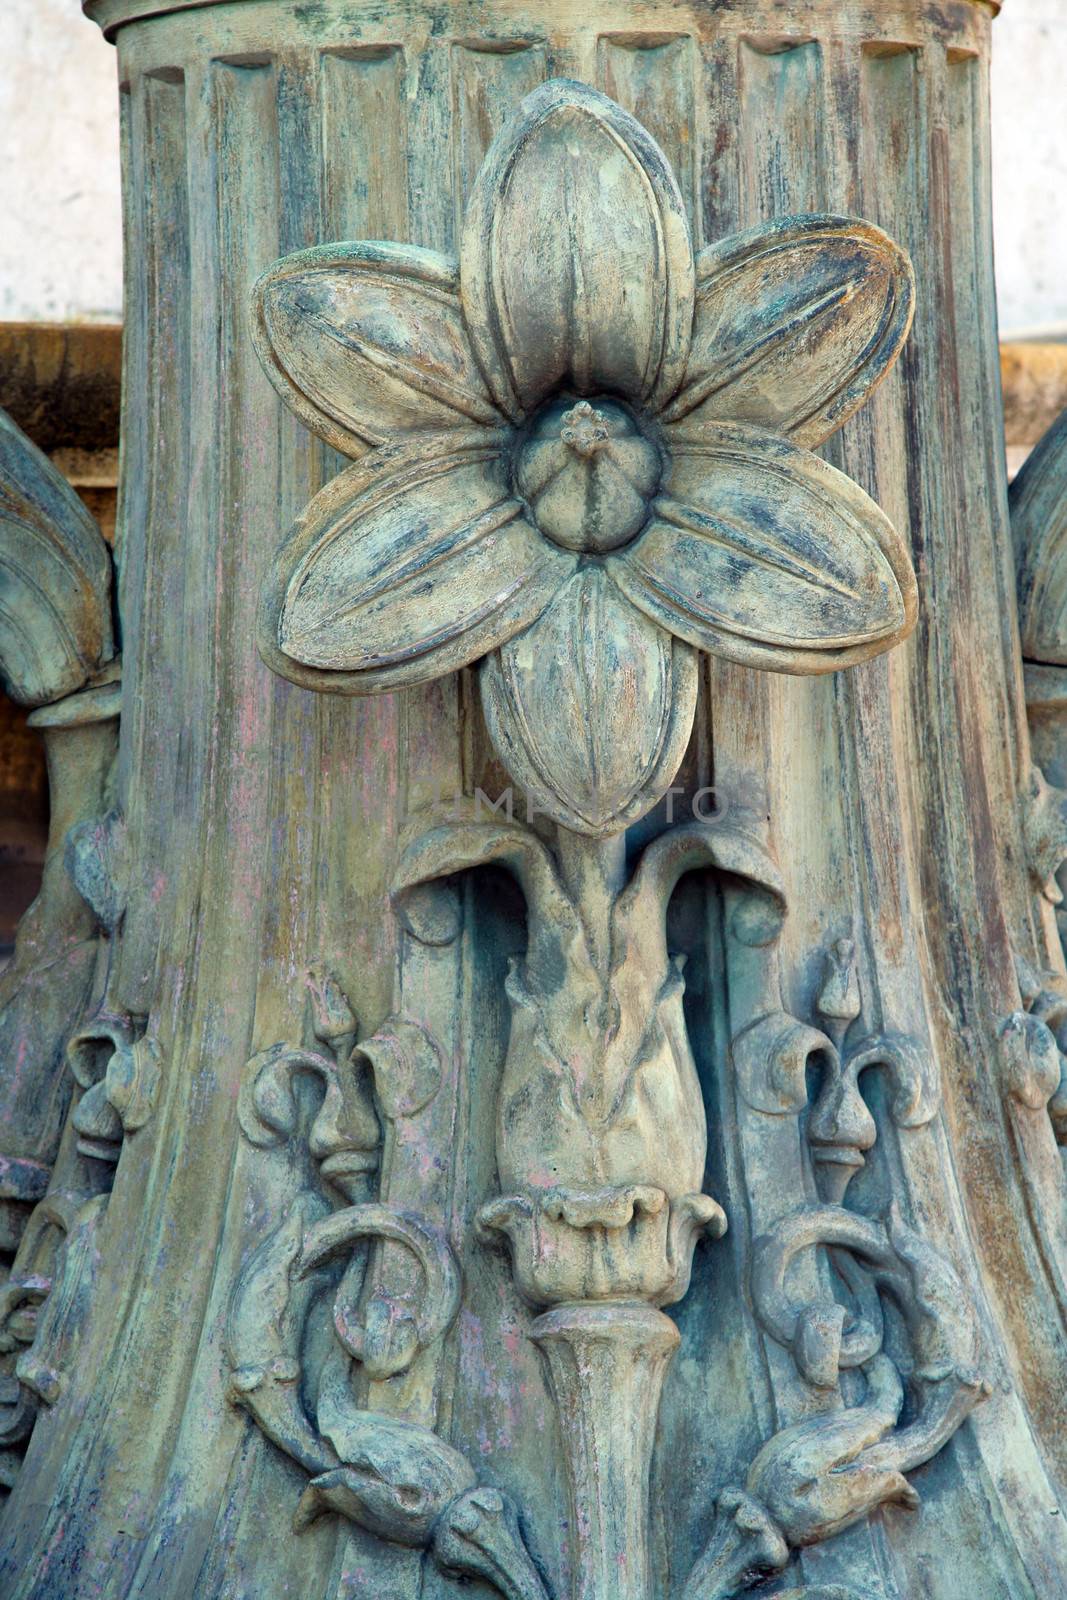 Carving details of a statue by CelsoDiniz